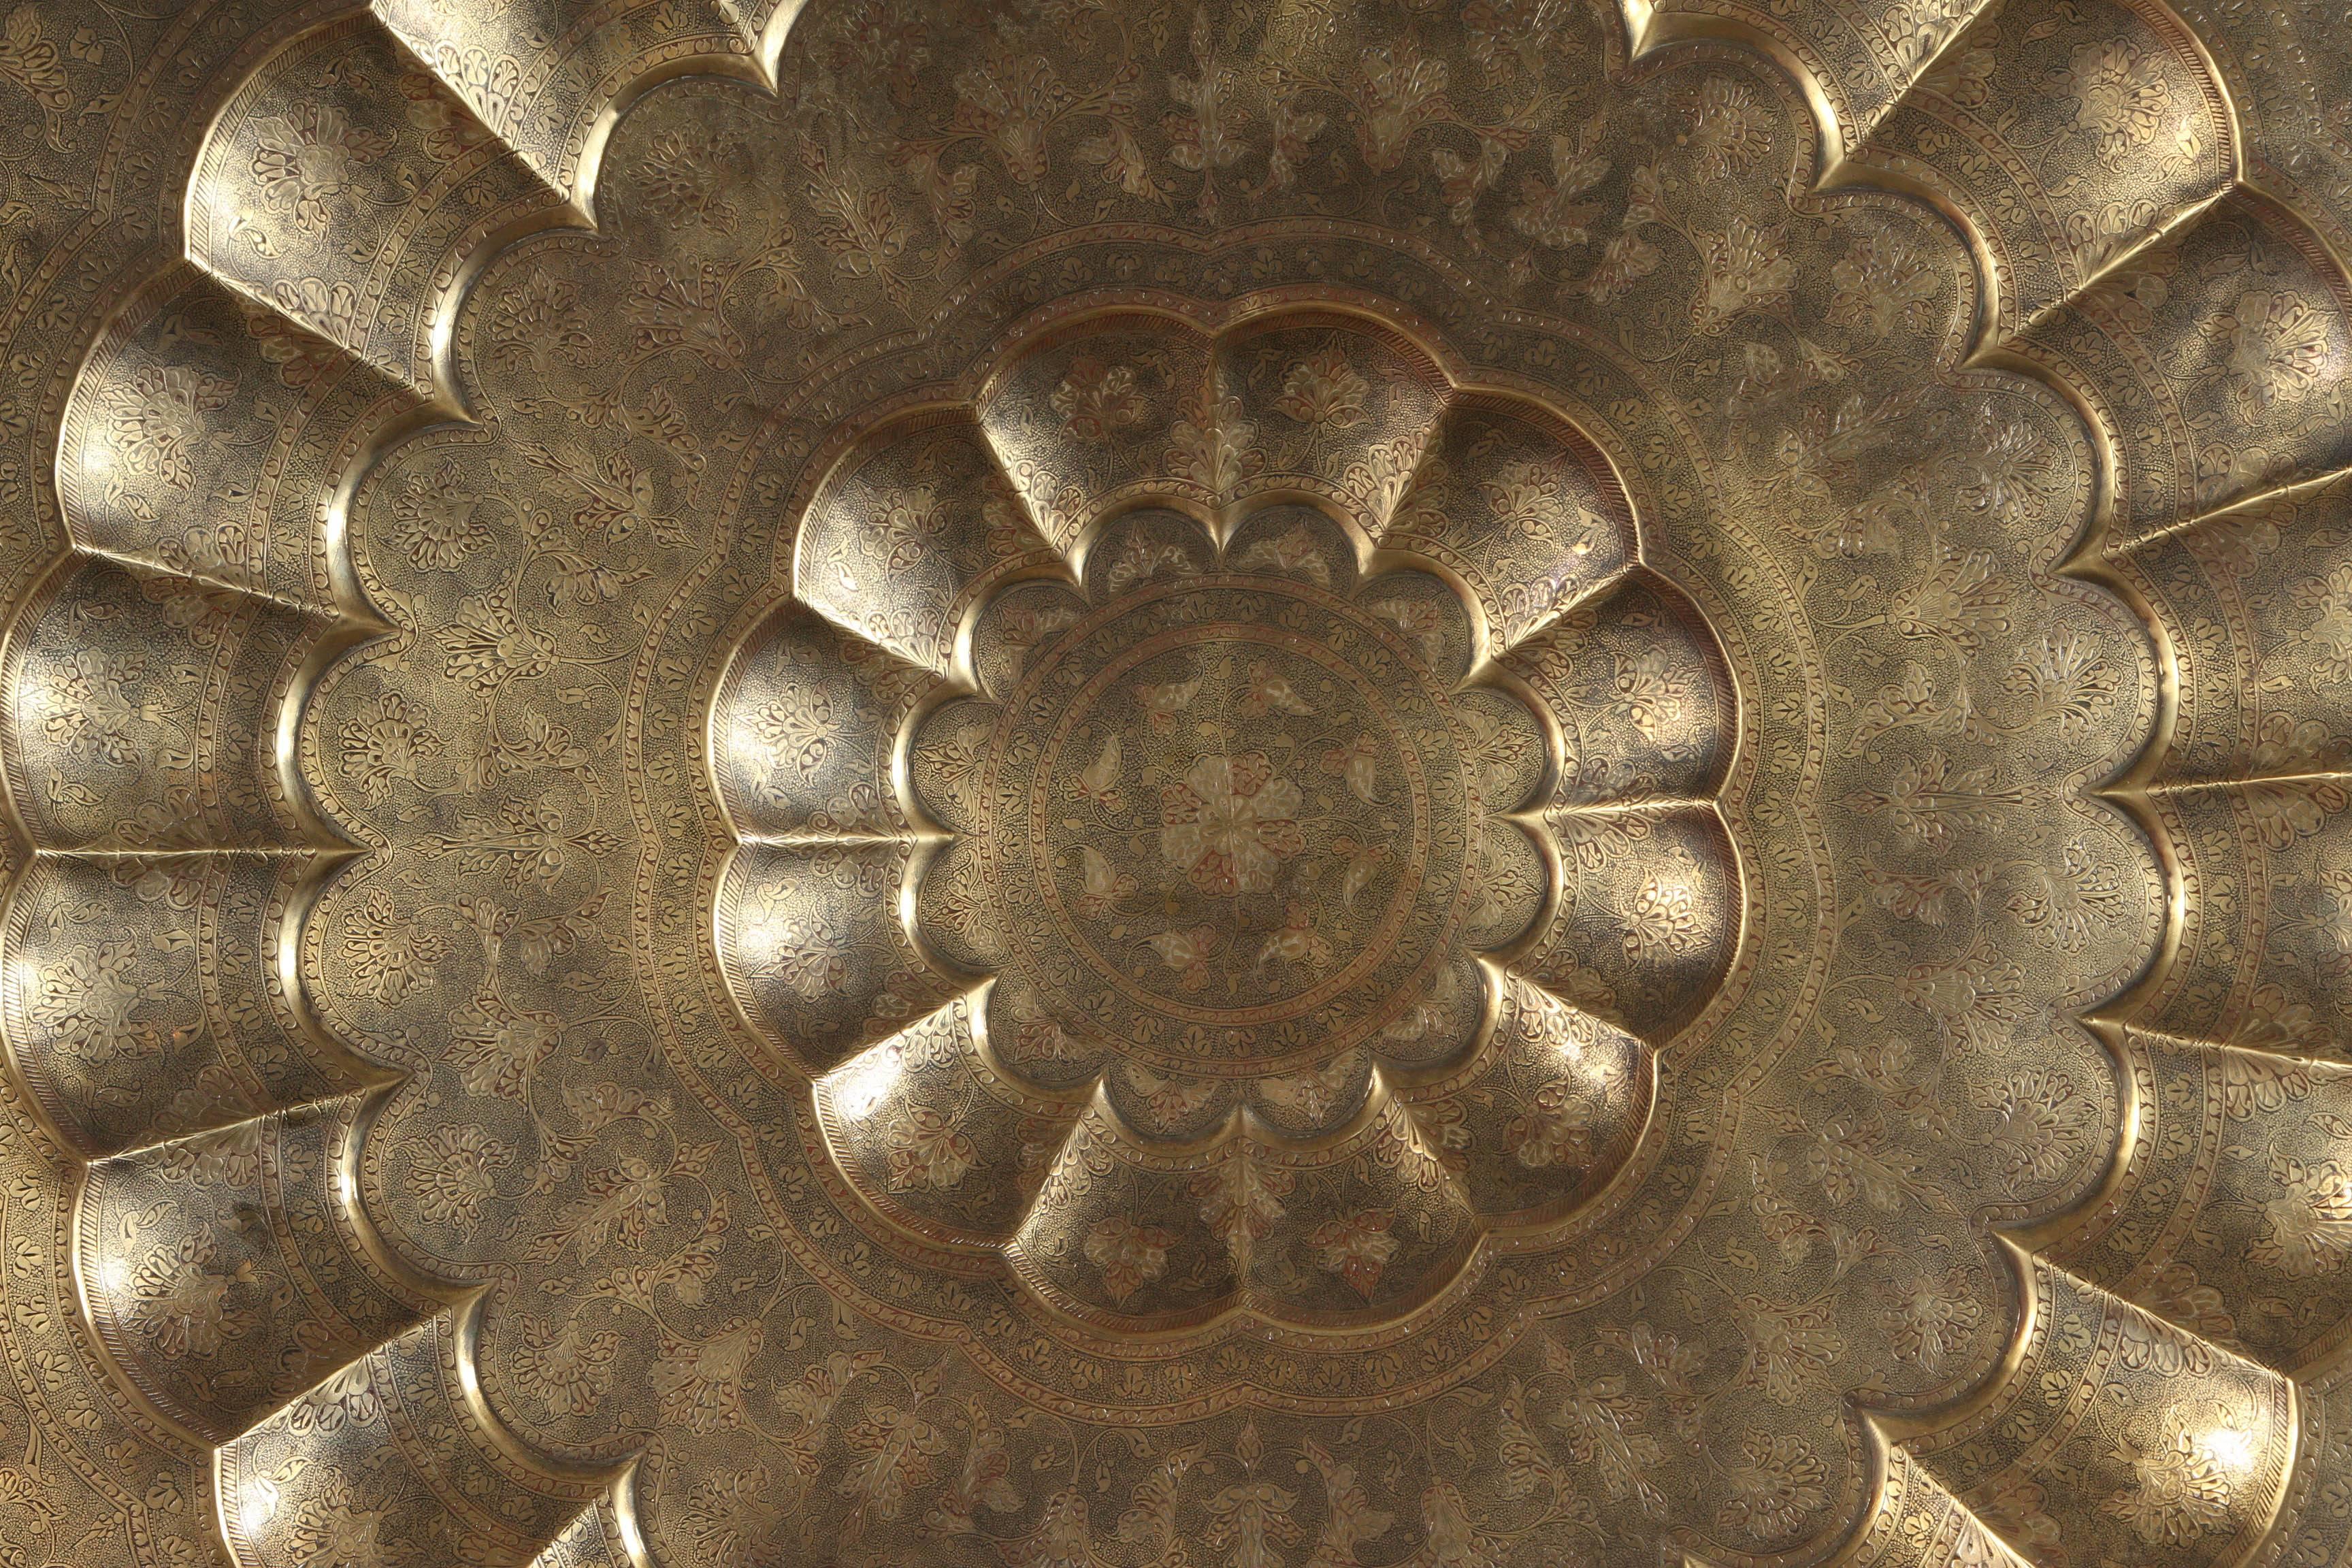 brass trays from india